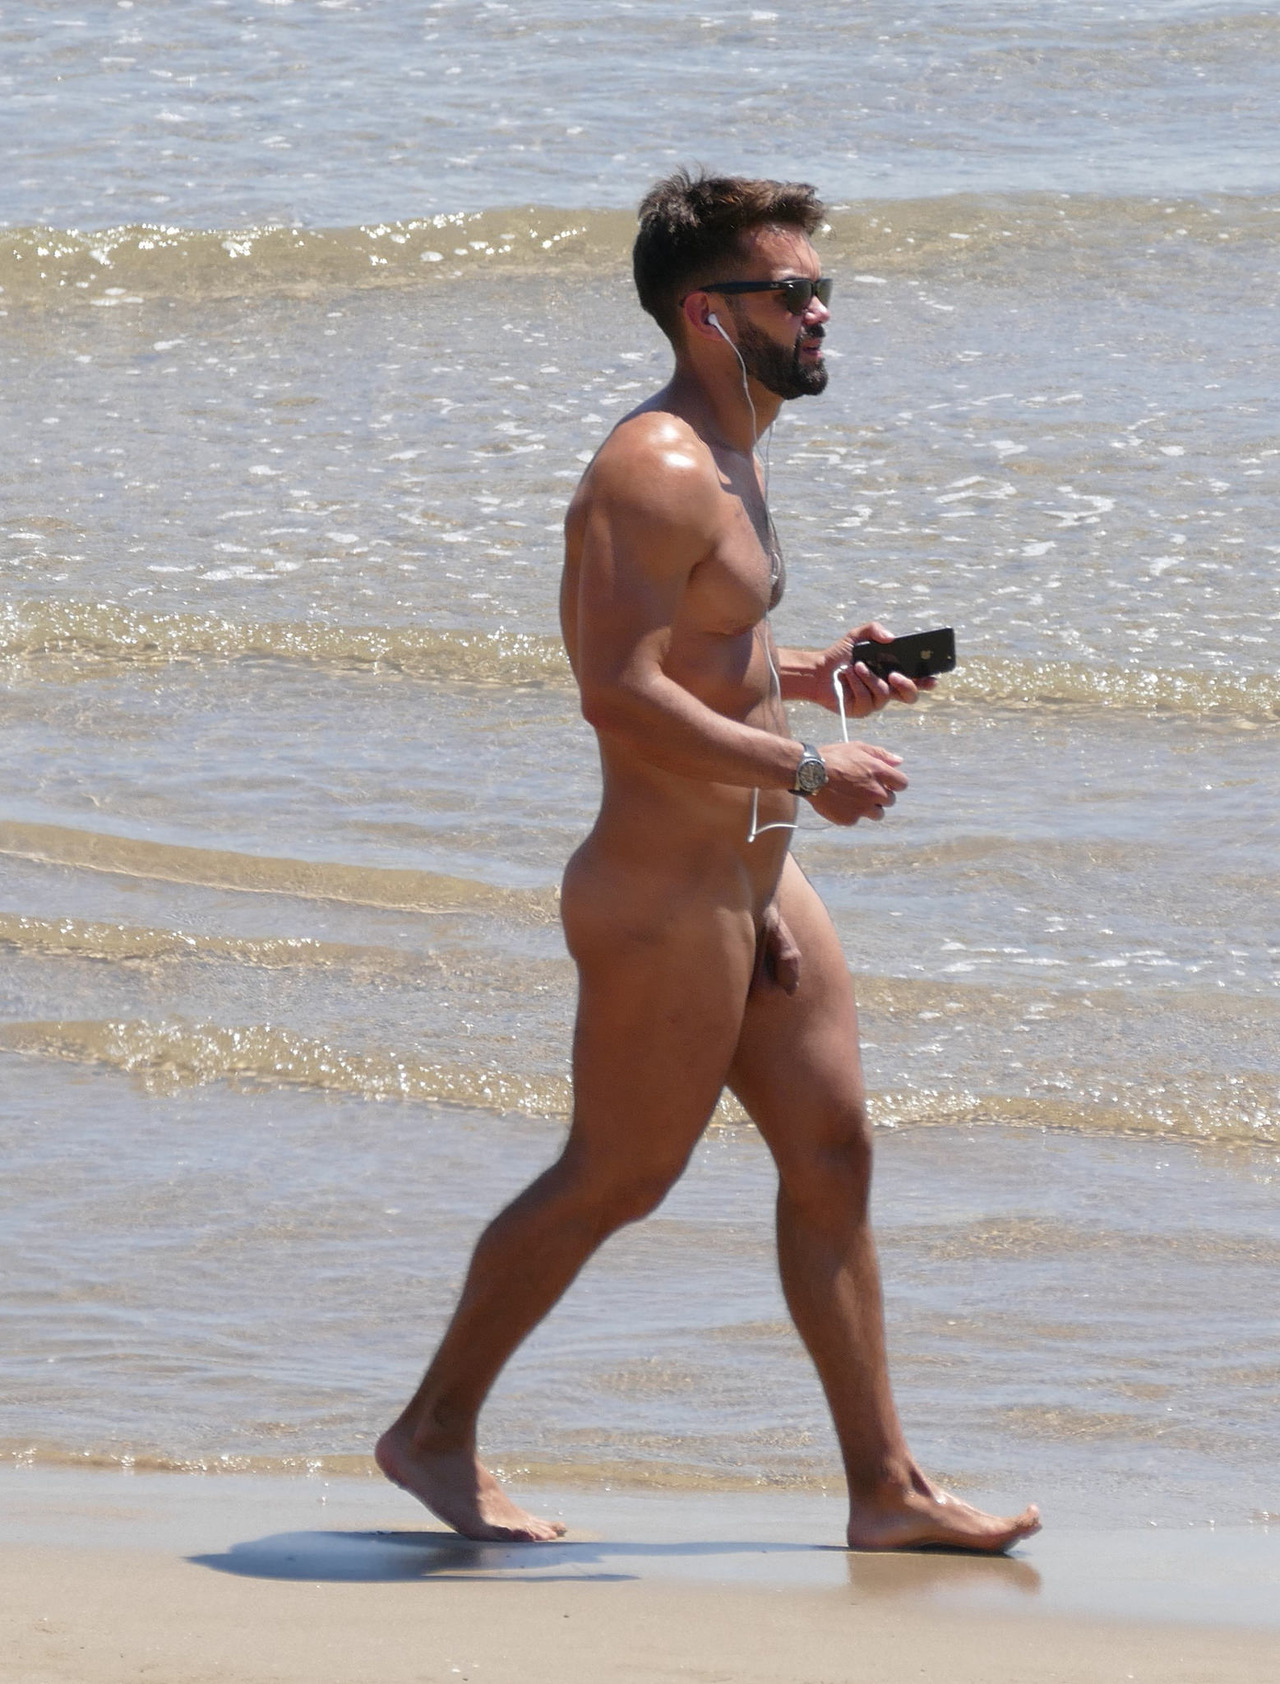 Nudist guys at beaches and in public - Gay Porn Wire. 